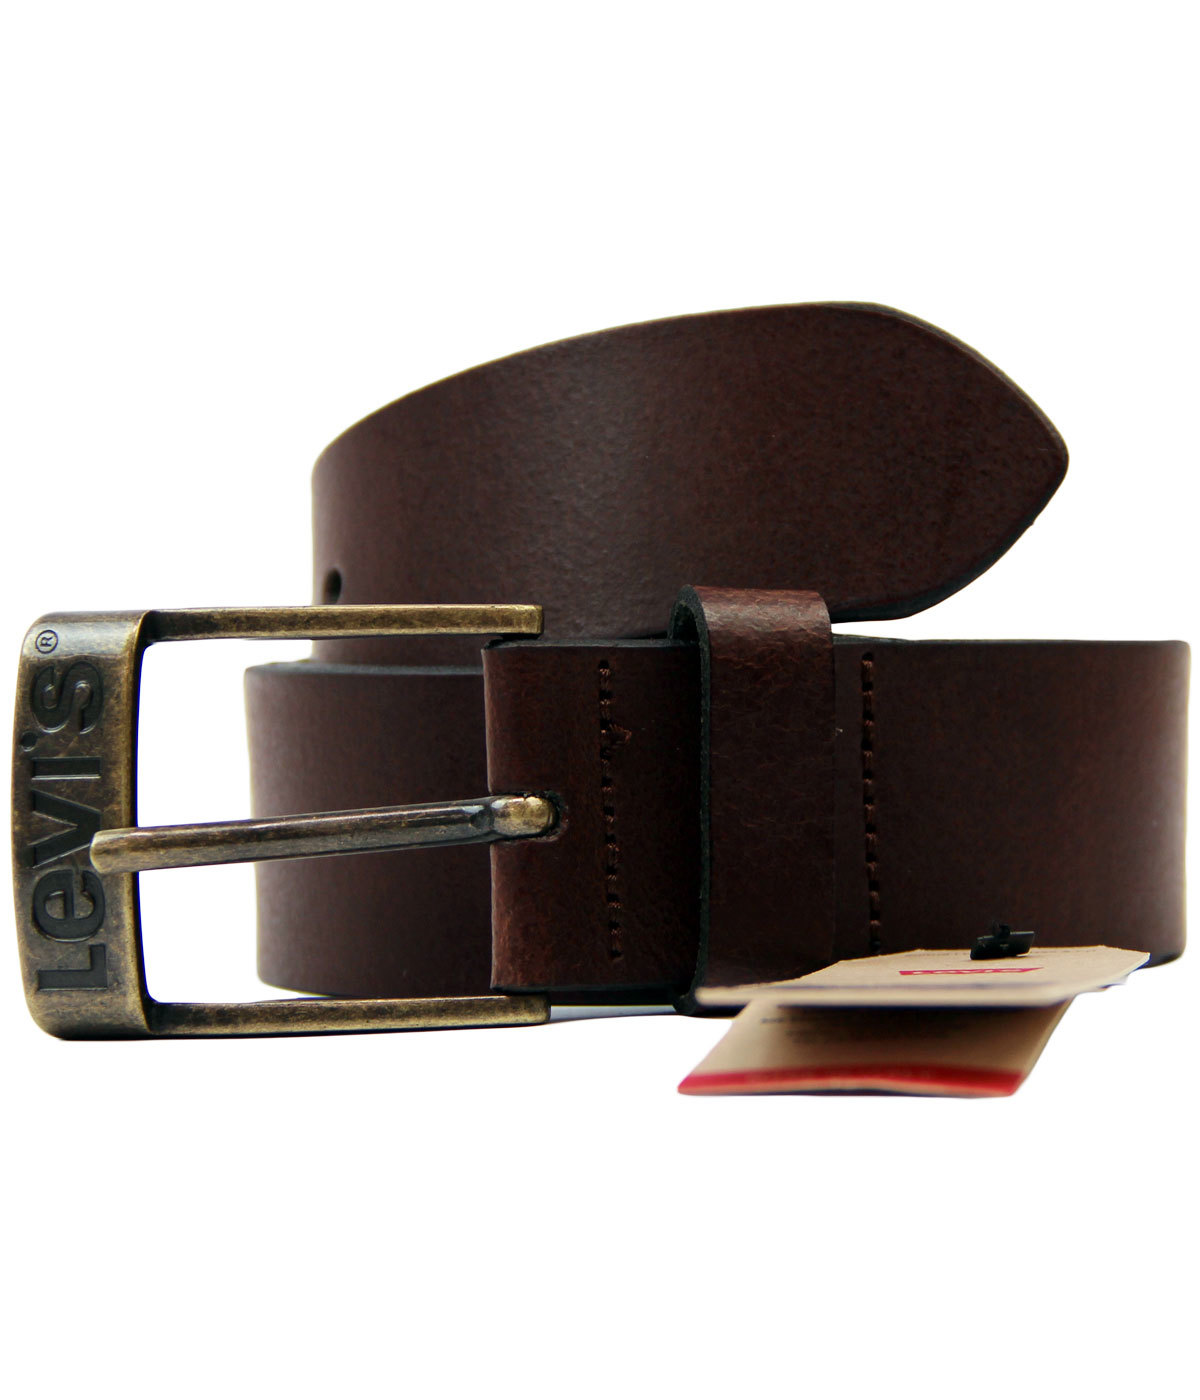 LEVI'S® Duncan Retro Mod Leather Belt in Bordo with Logo Buckle